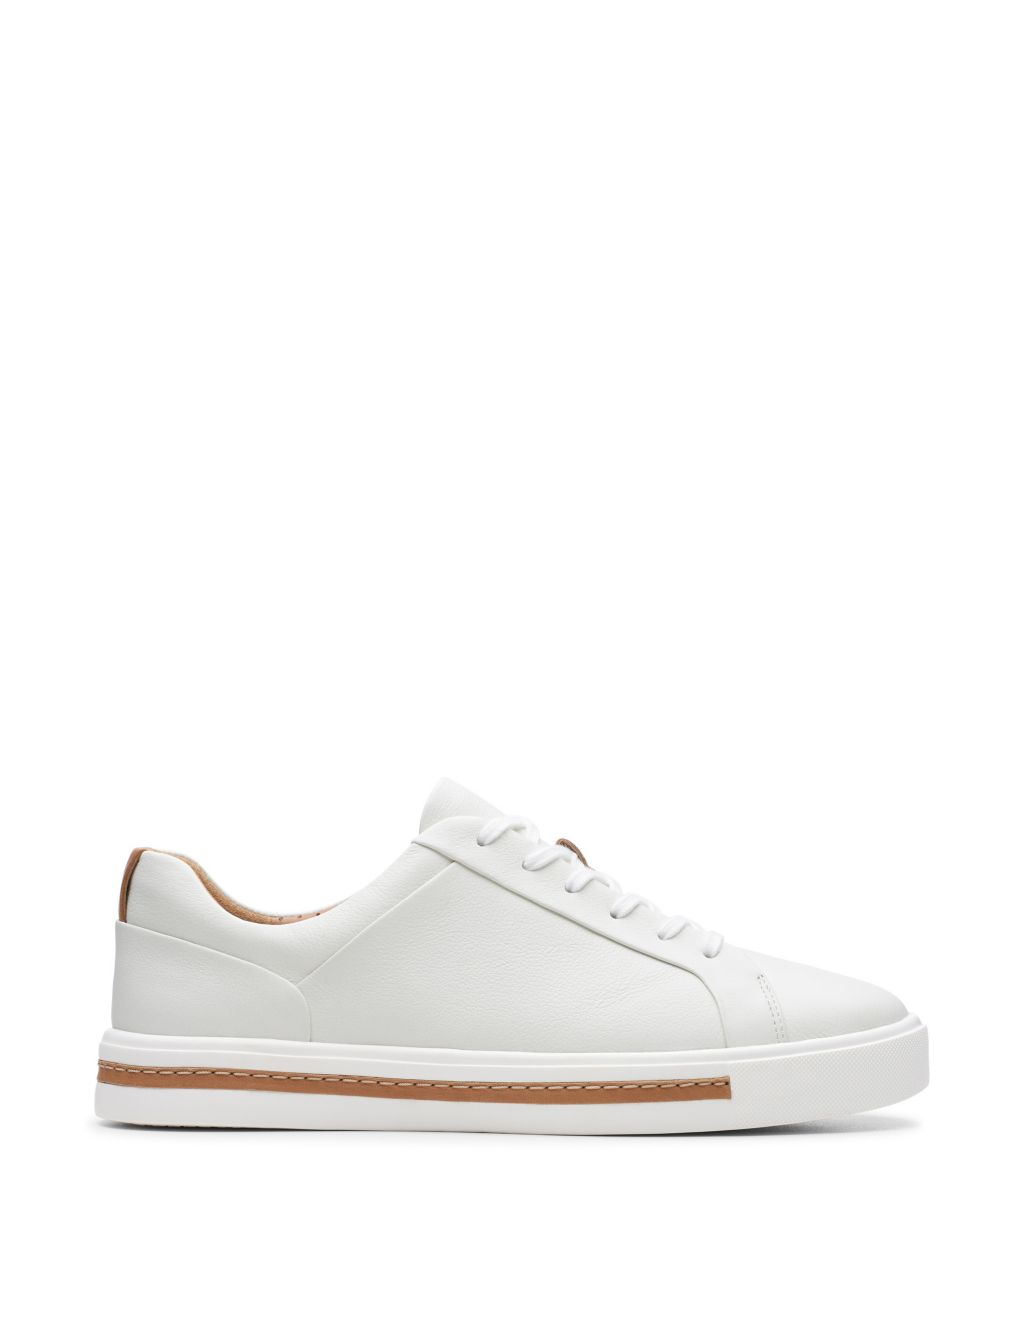 Wide Fit Leather Lace Up Trainers image 1